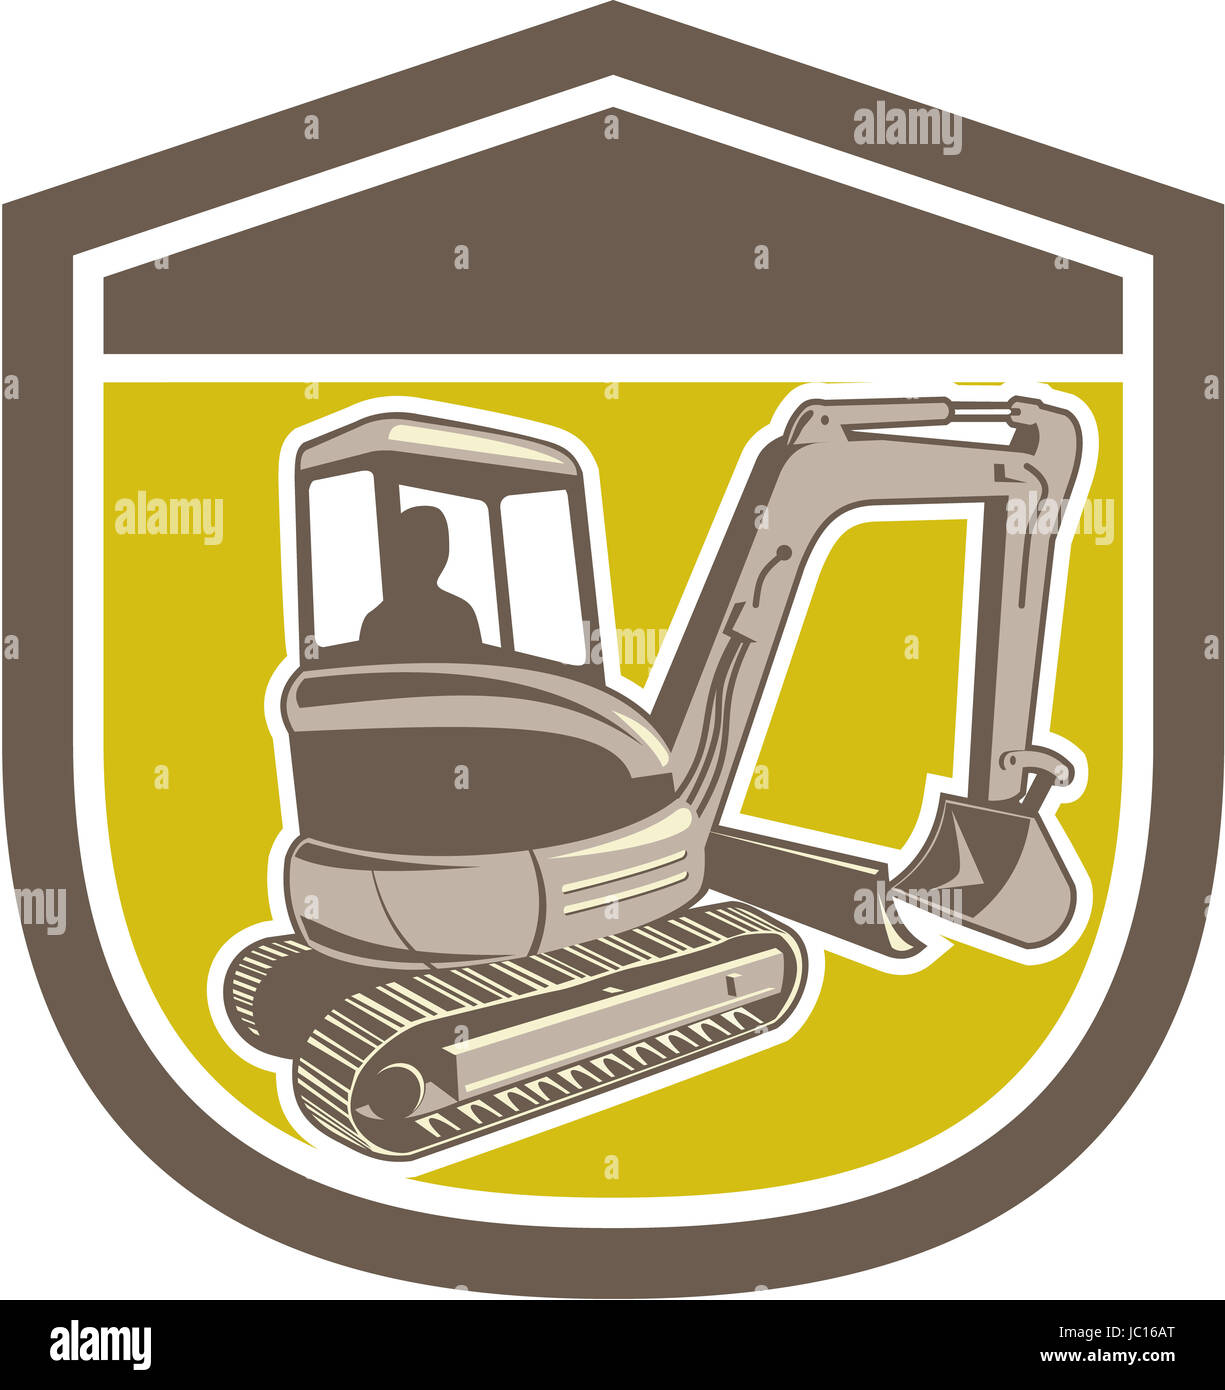 Illustration of a construction digger mechanical excavator set inside shield crest shape on isolated background done in retro style . Stock Photo